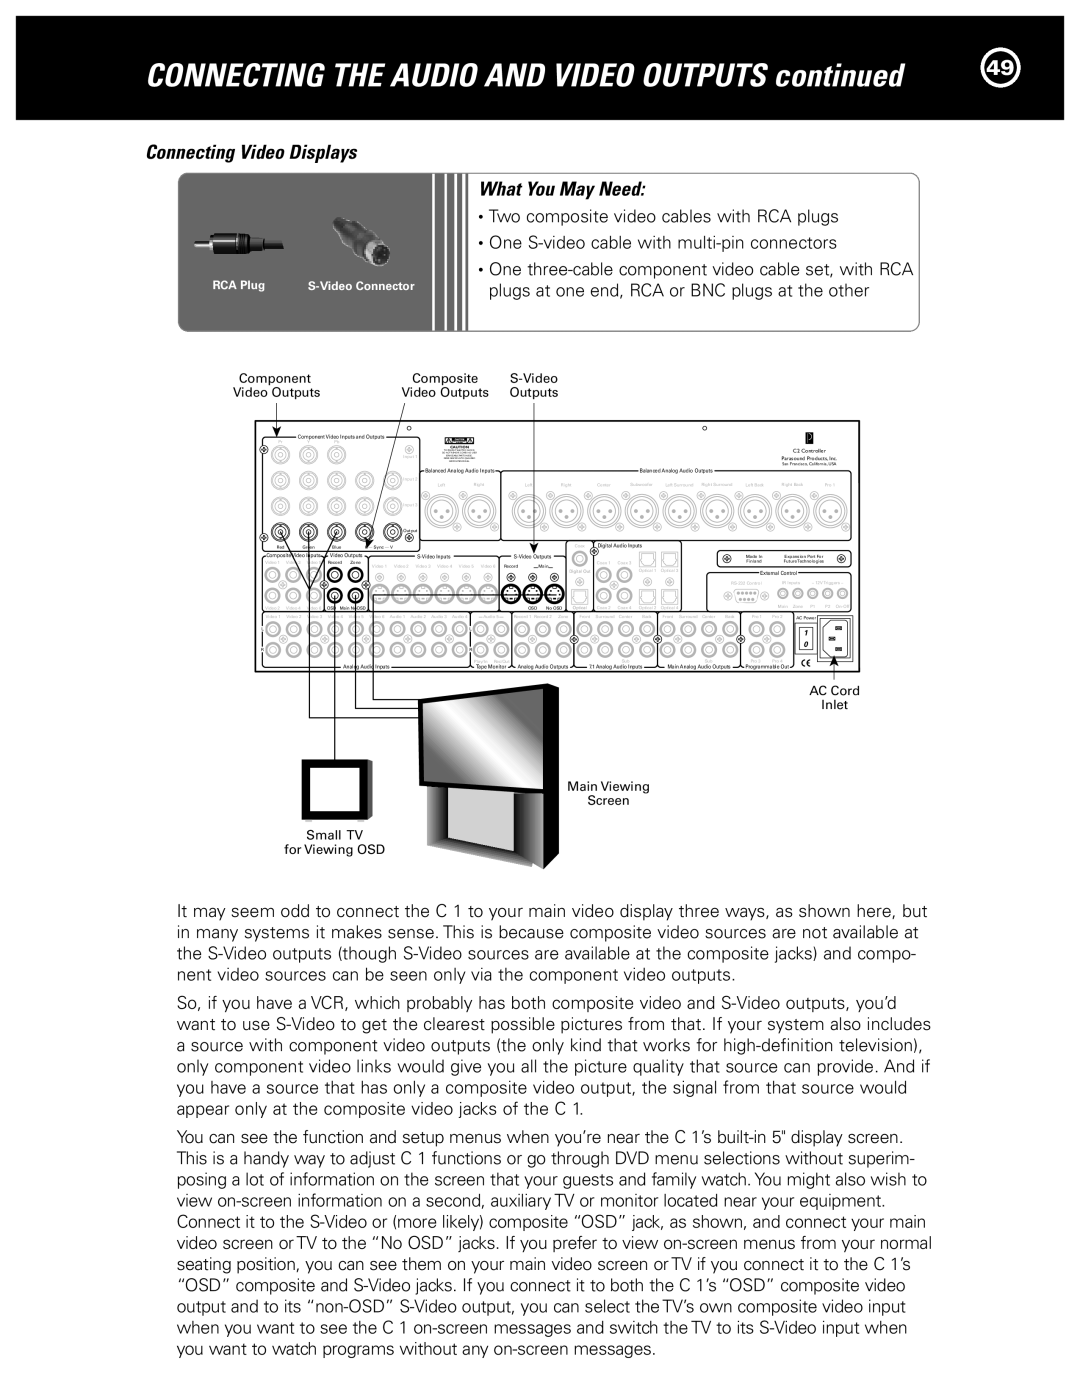 Parasound Halo C1 Controller manual CONNECTING THE AUDIO AND VIDEO OUTPUTS continued, Connecting Video Displays 